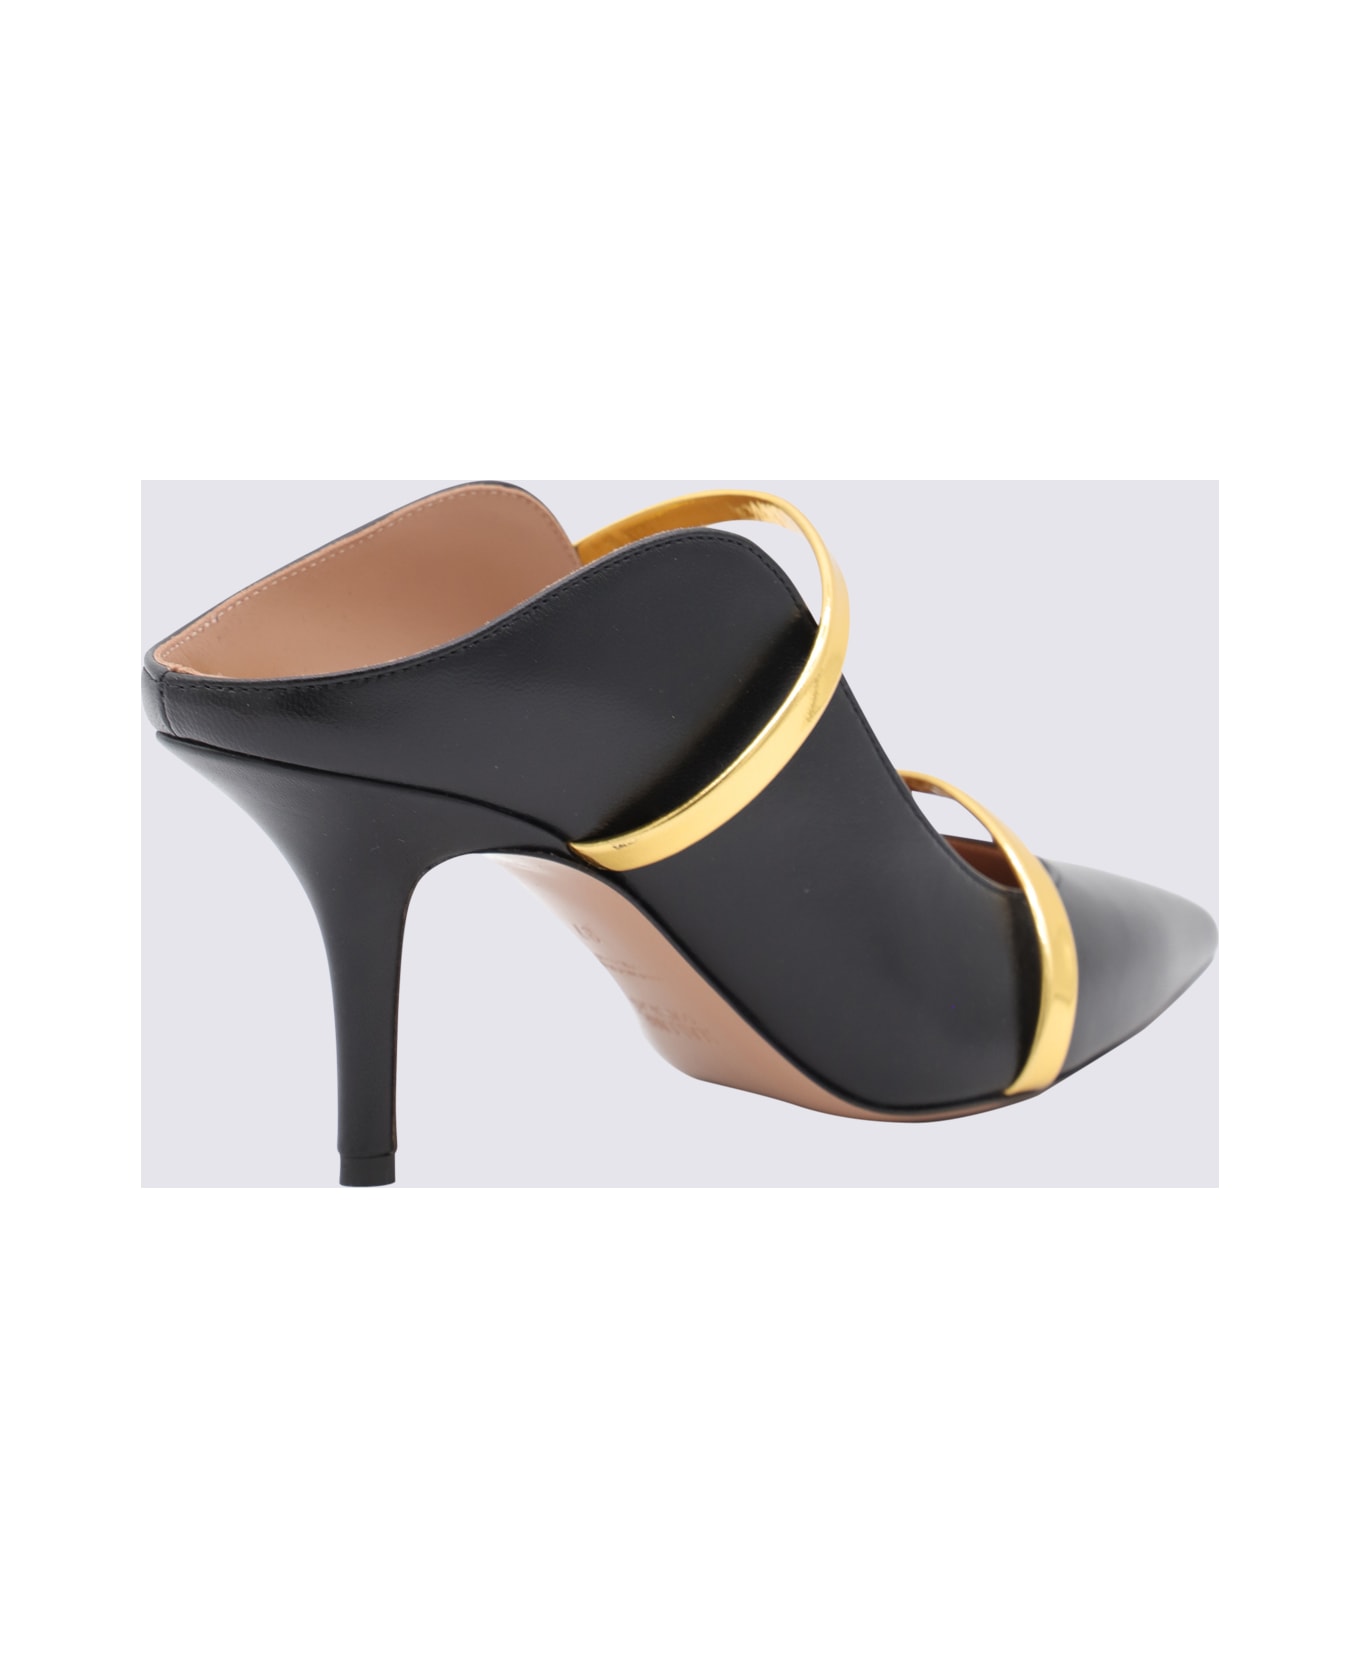 Malone Souliers Black And Gold Leather Maureen Pumps - Black サンダル